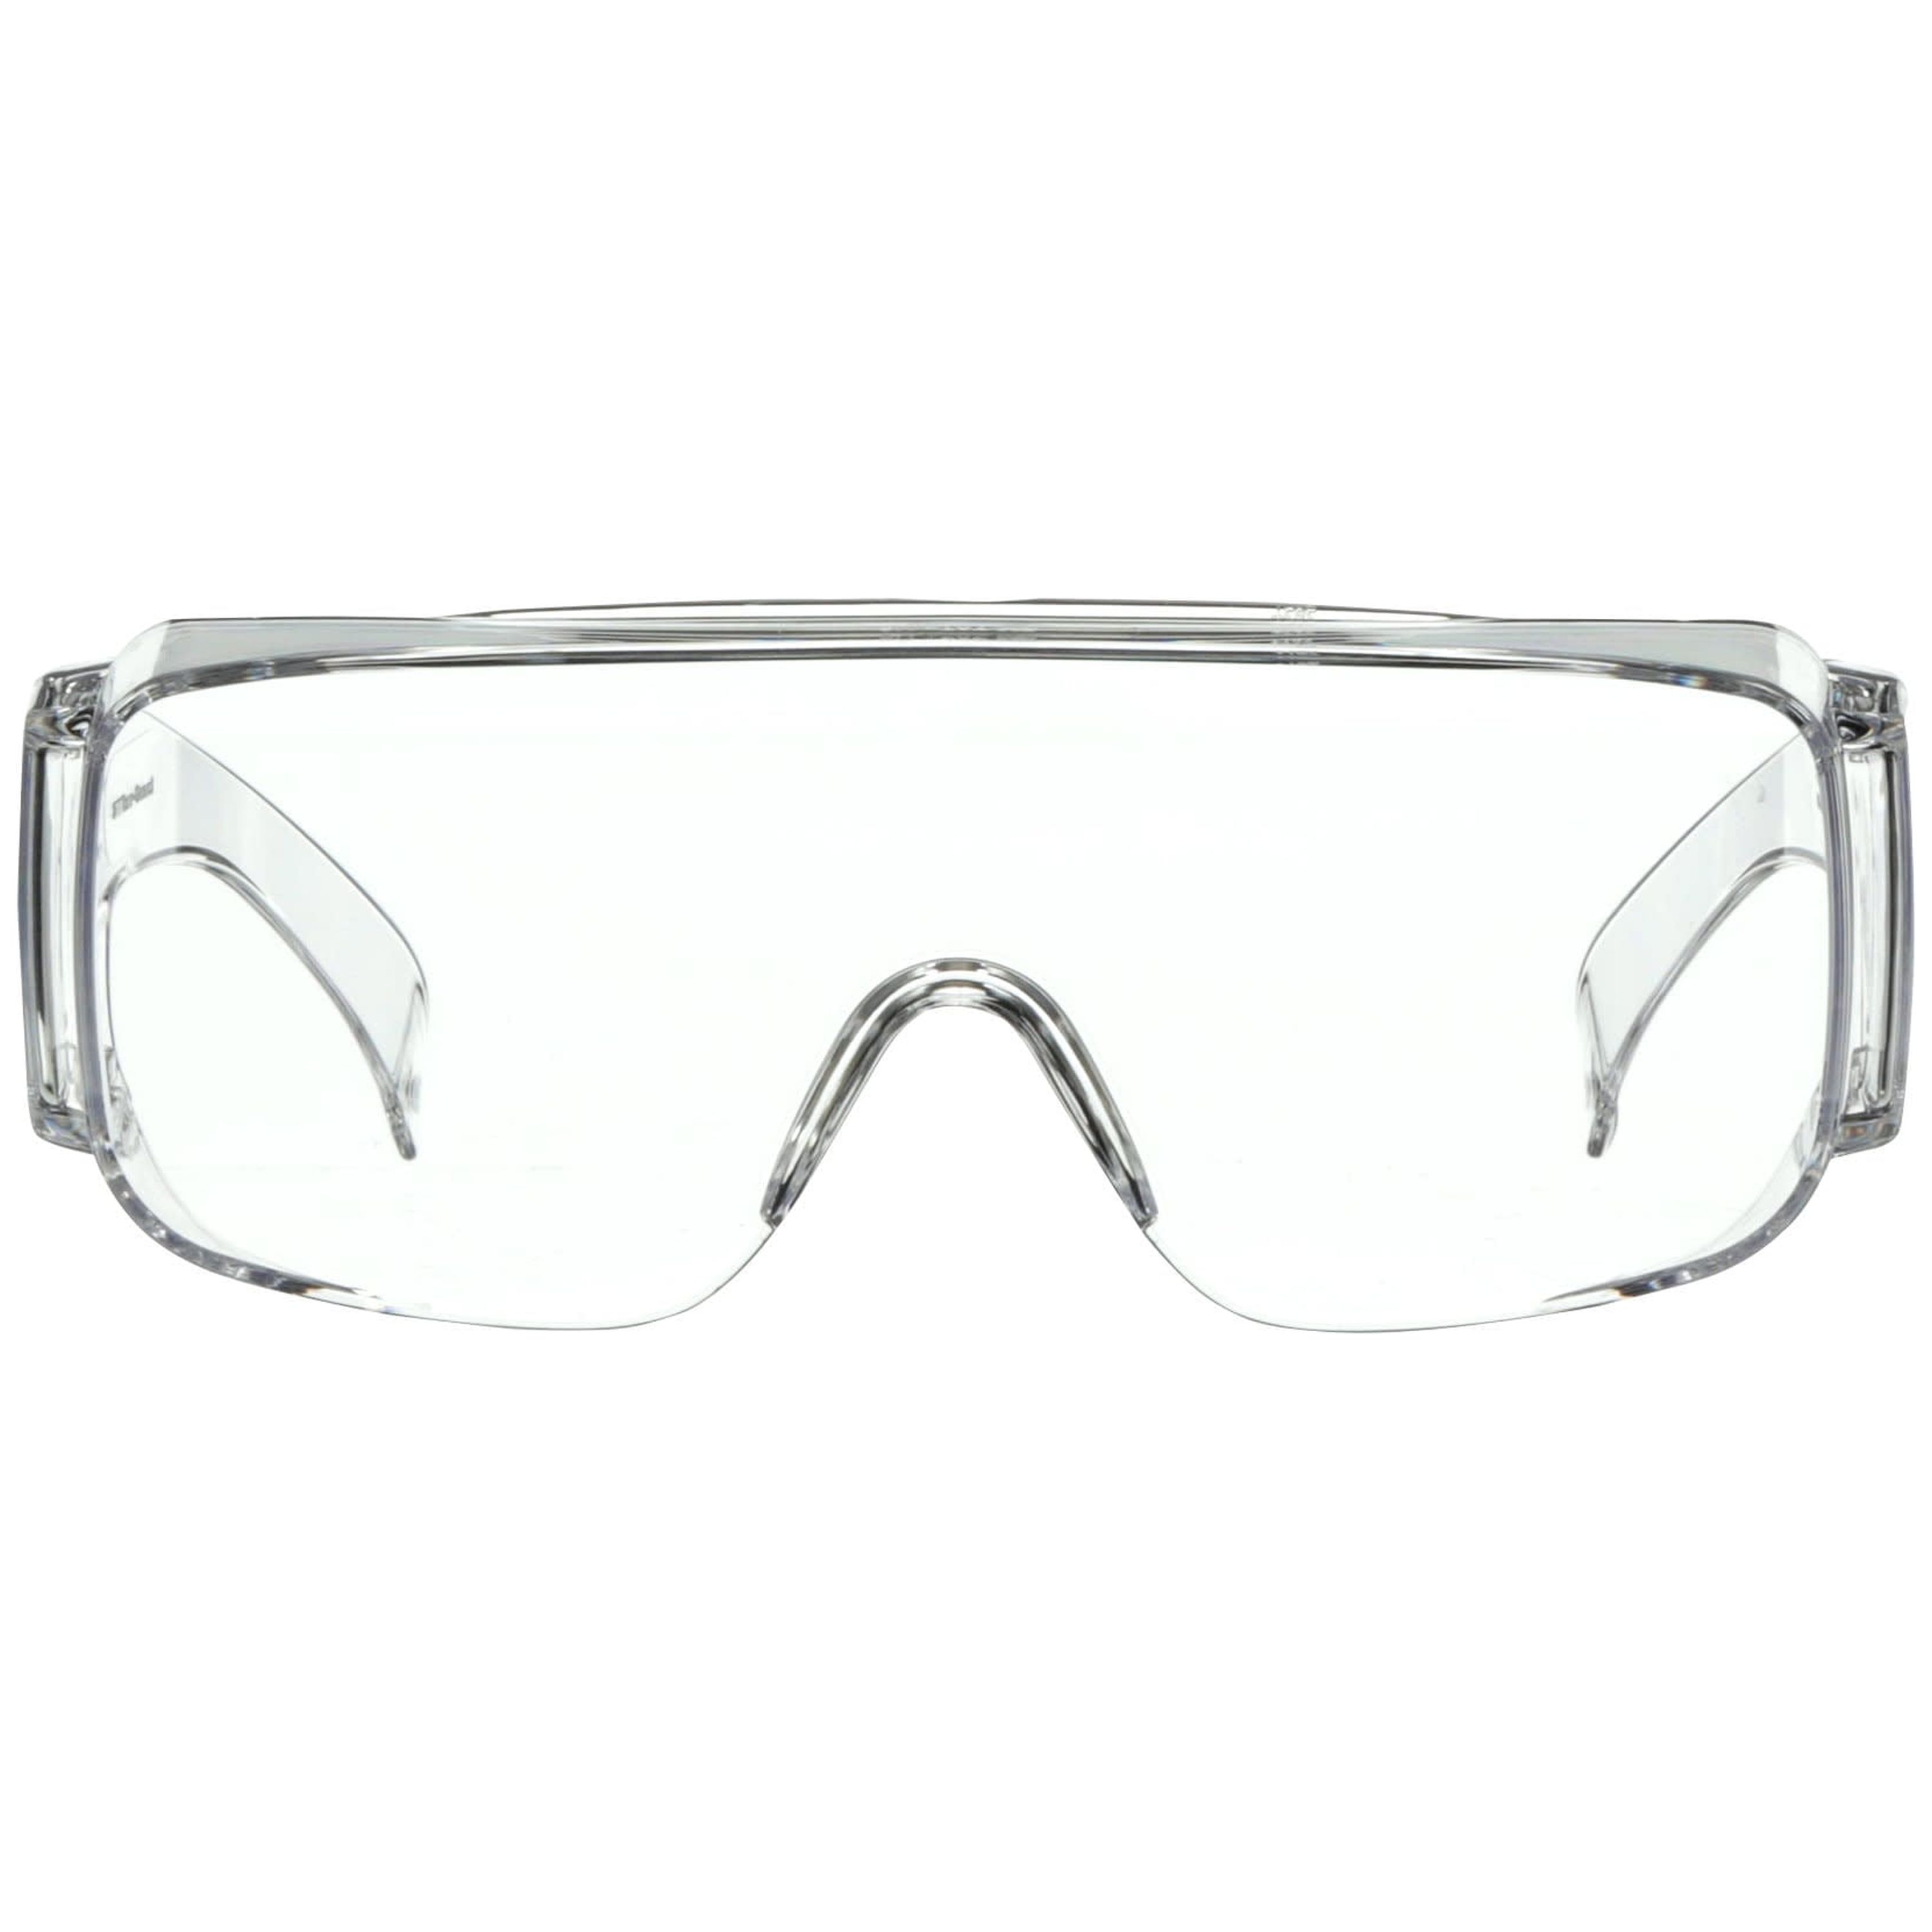 3M Over-the-Glass Clear Lens Eyewear Protection, Clear Frame - image 2 of 5